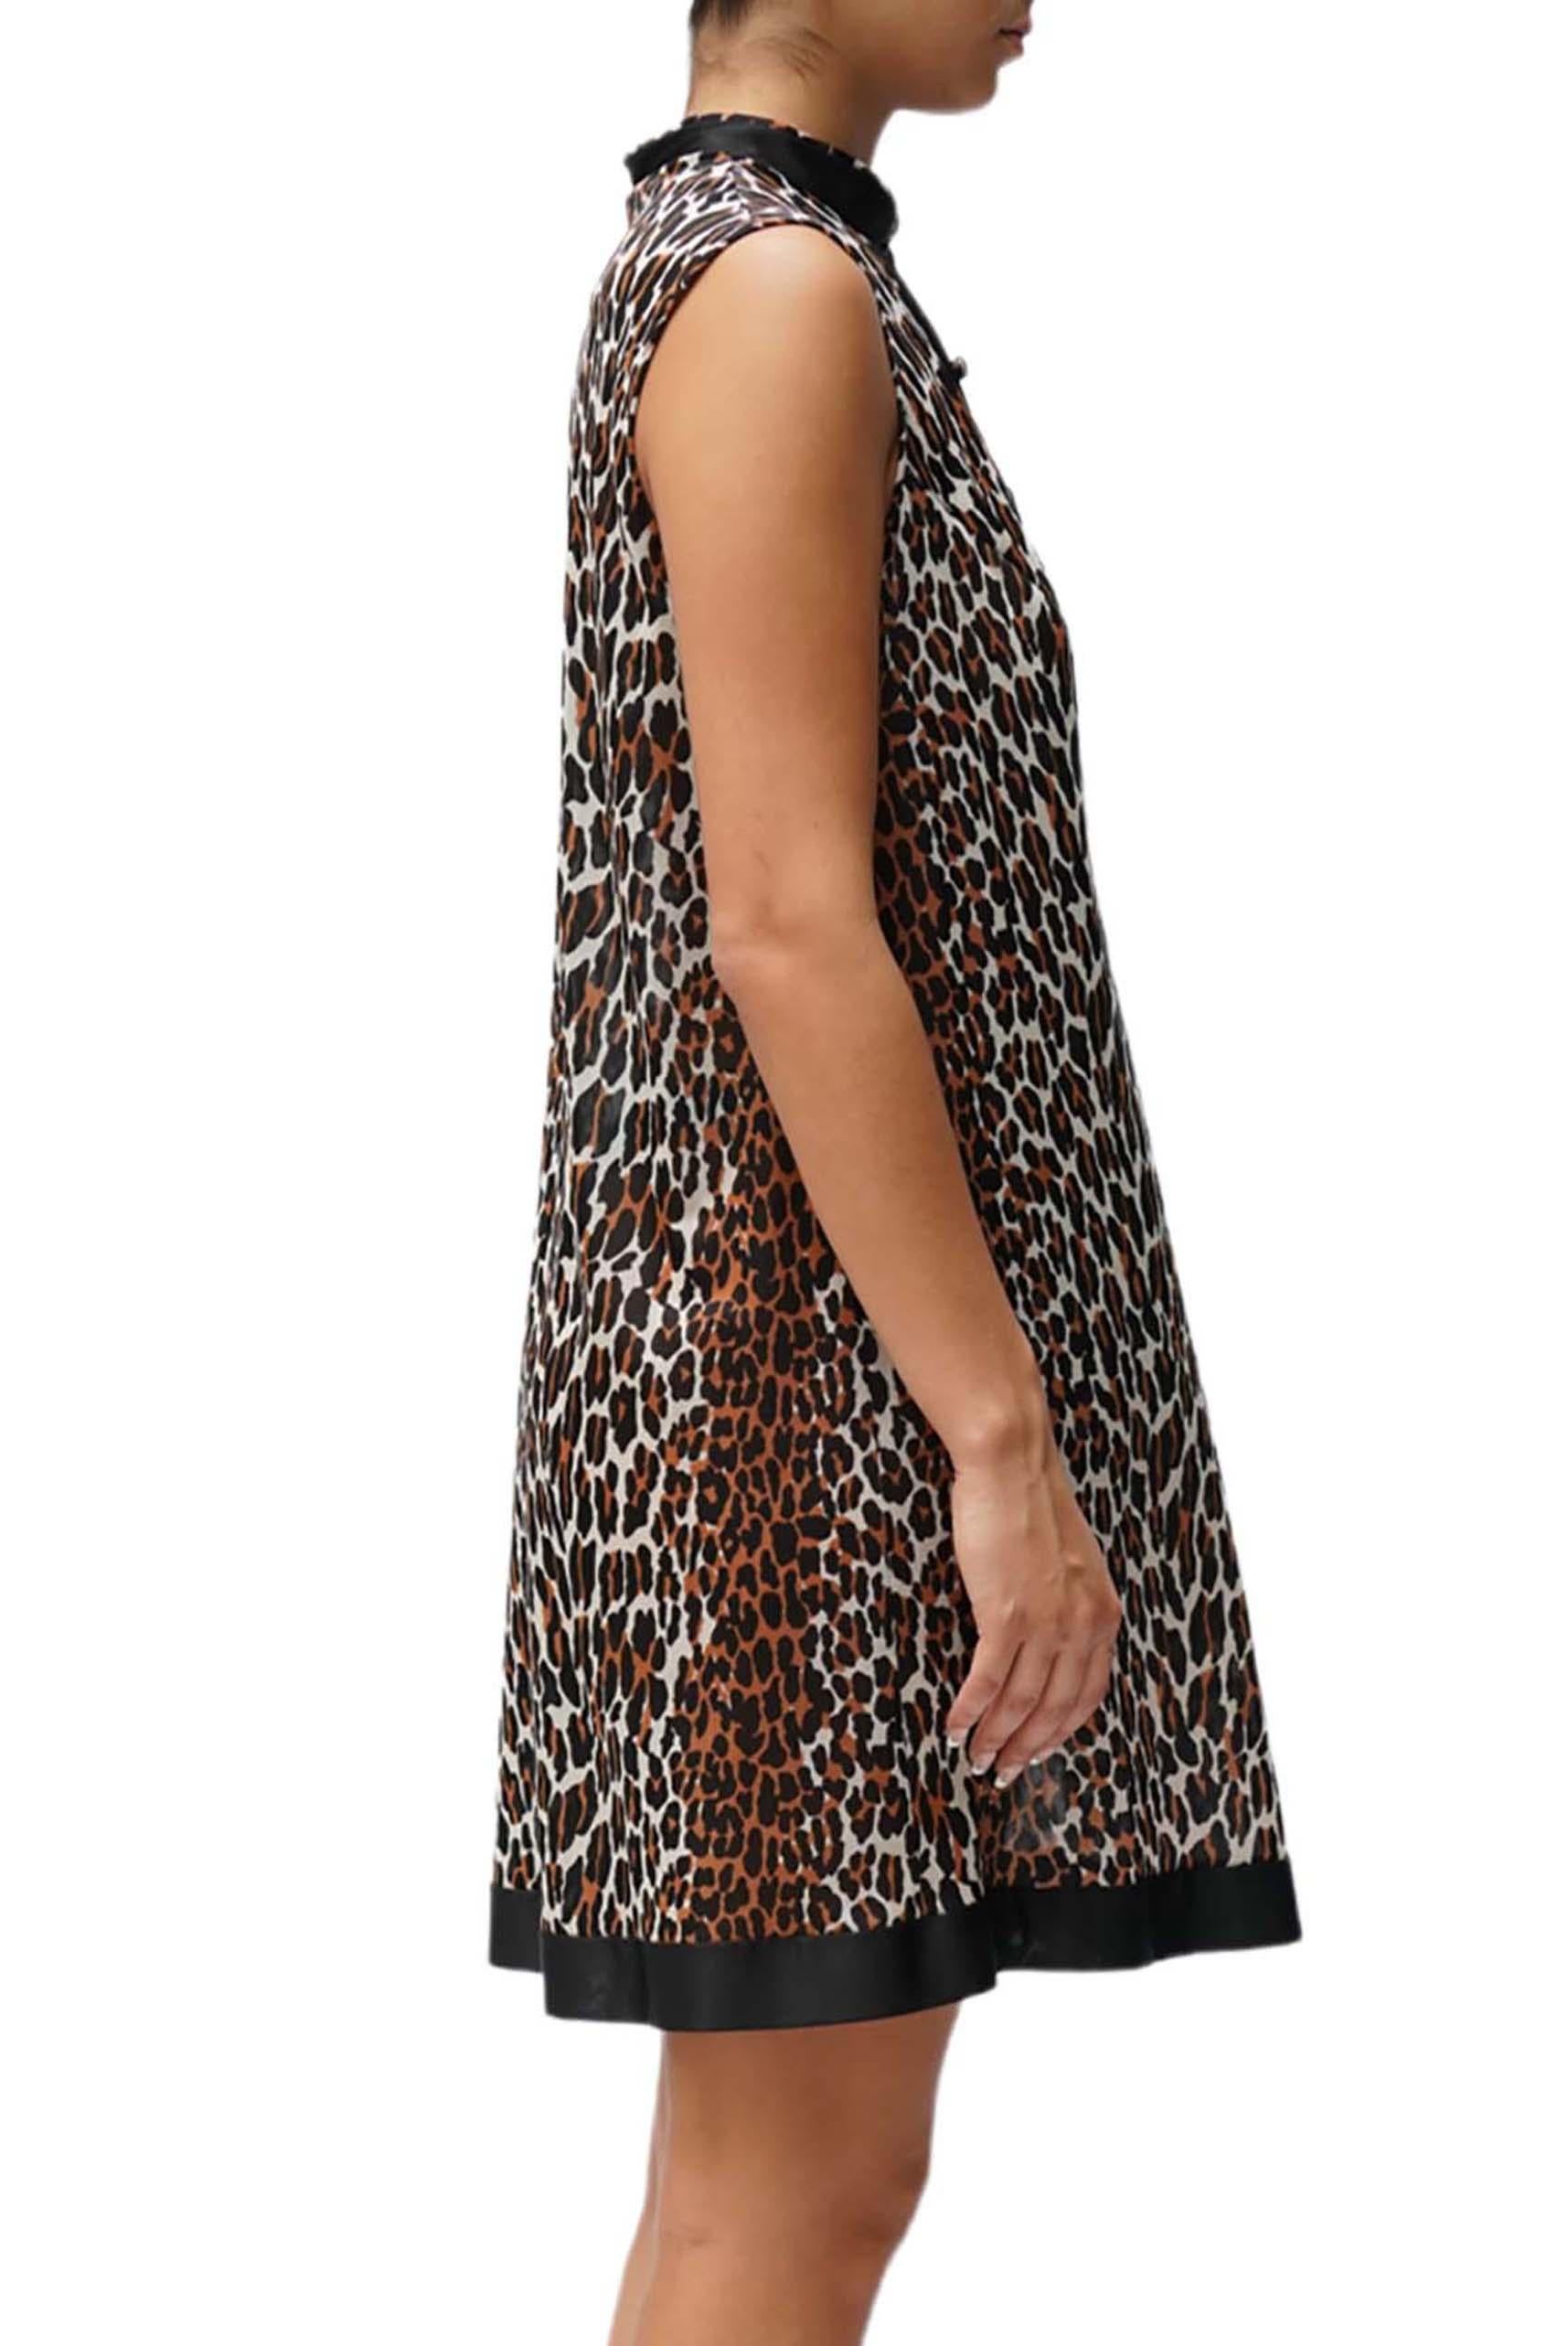 1960S Leopard Print Nylon Tricot Jersey Mod Slip Dress Negligee In Excellent Condition For Sale In New York, NY